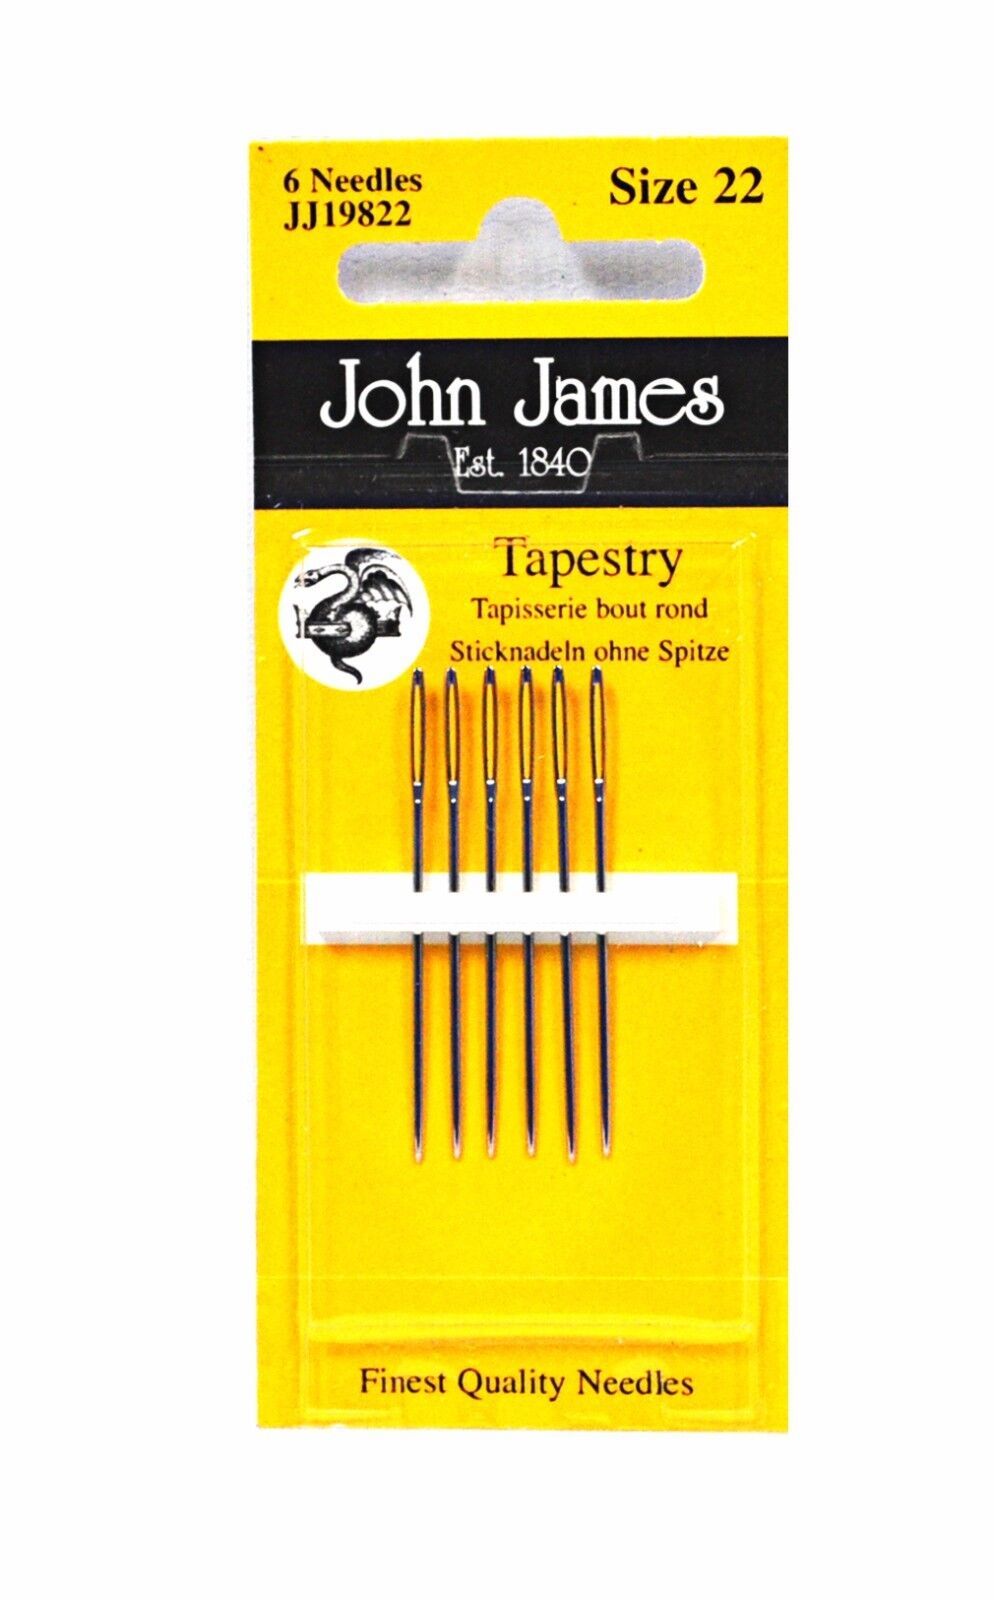 Primary image for John James Tapestry Needle Size 22